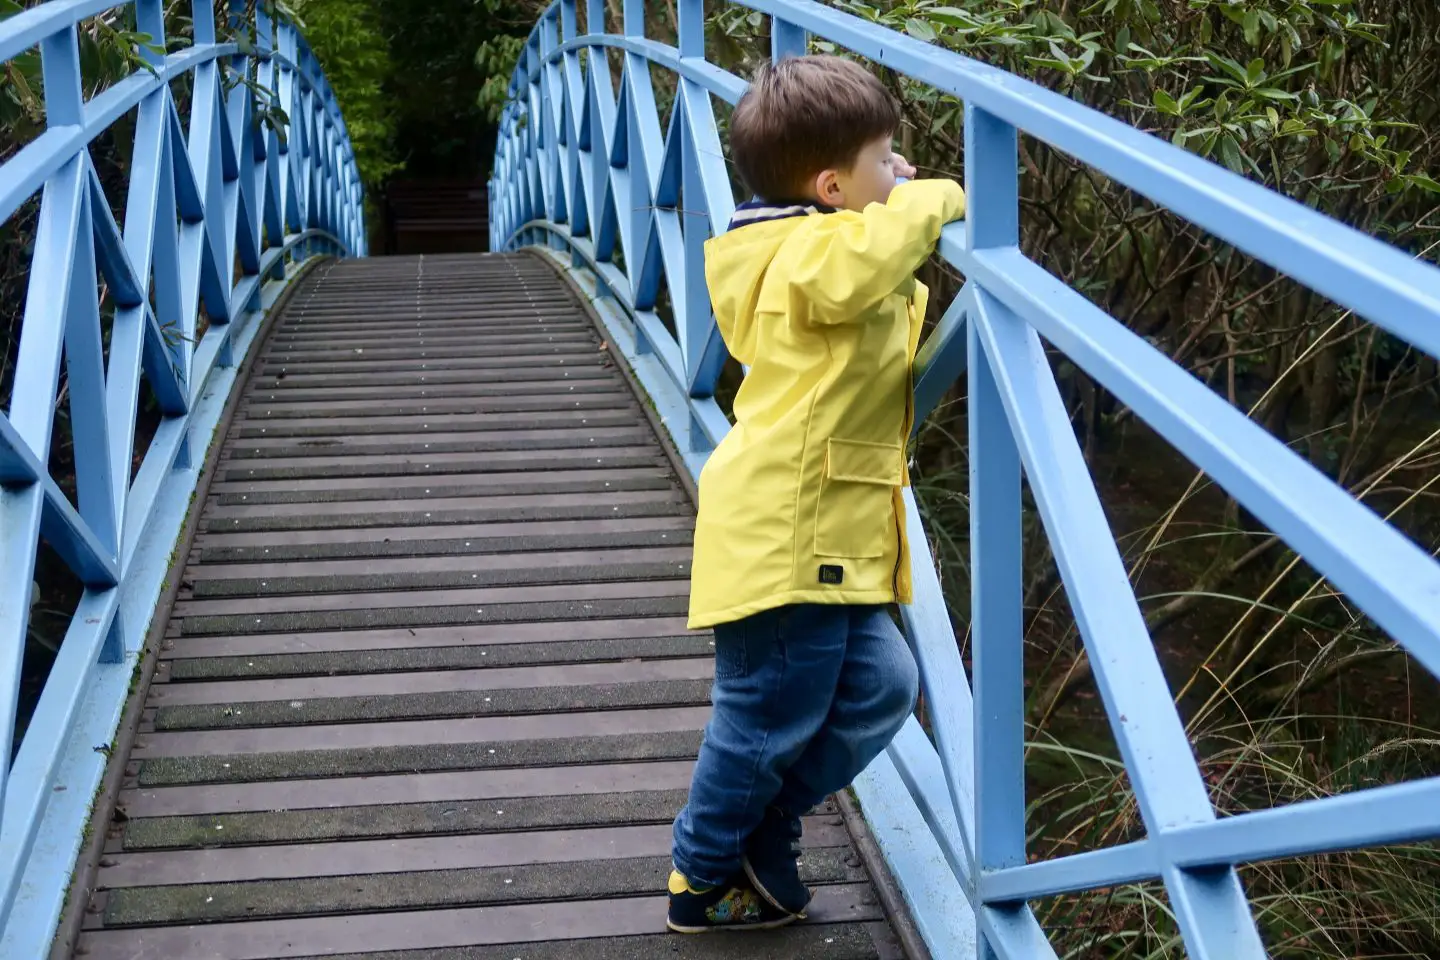 A boy standing on a bridge with blue railings, leaning against them to see over the side